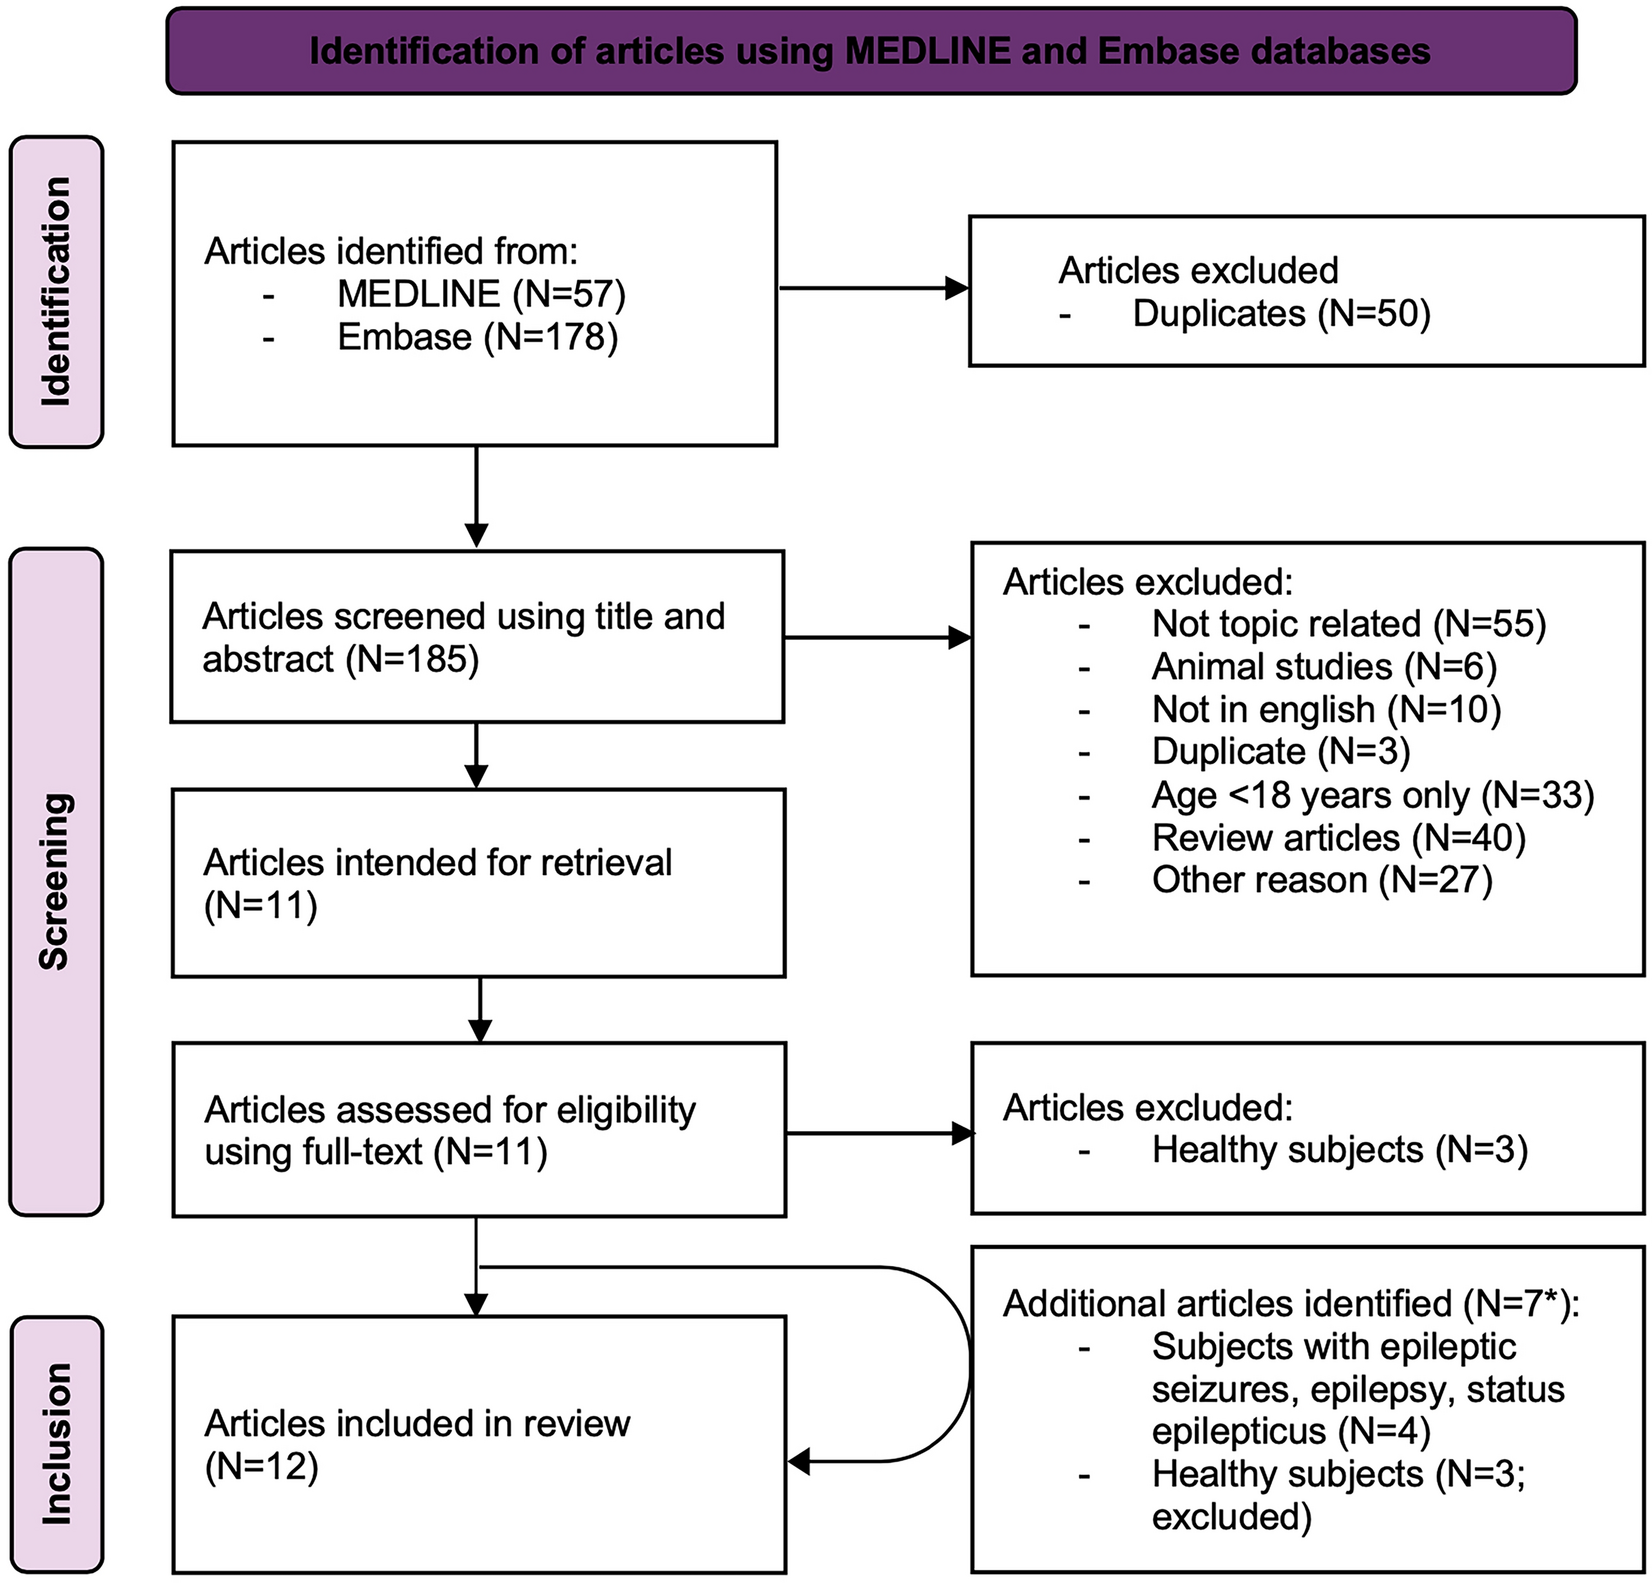 Efficacy and Tolerability of Intranasal Midazolam Administration for Antiseizure Treatment in Adults: A Systematic Review